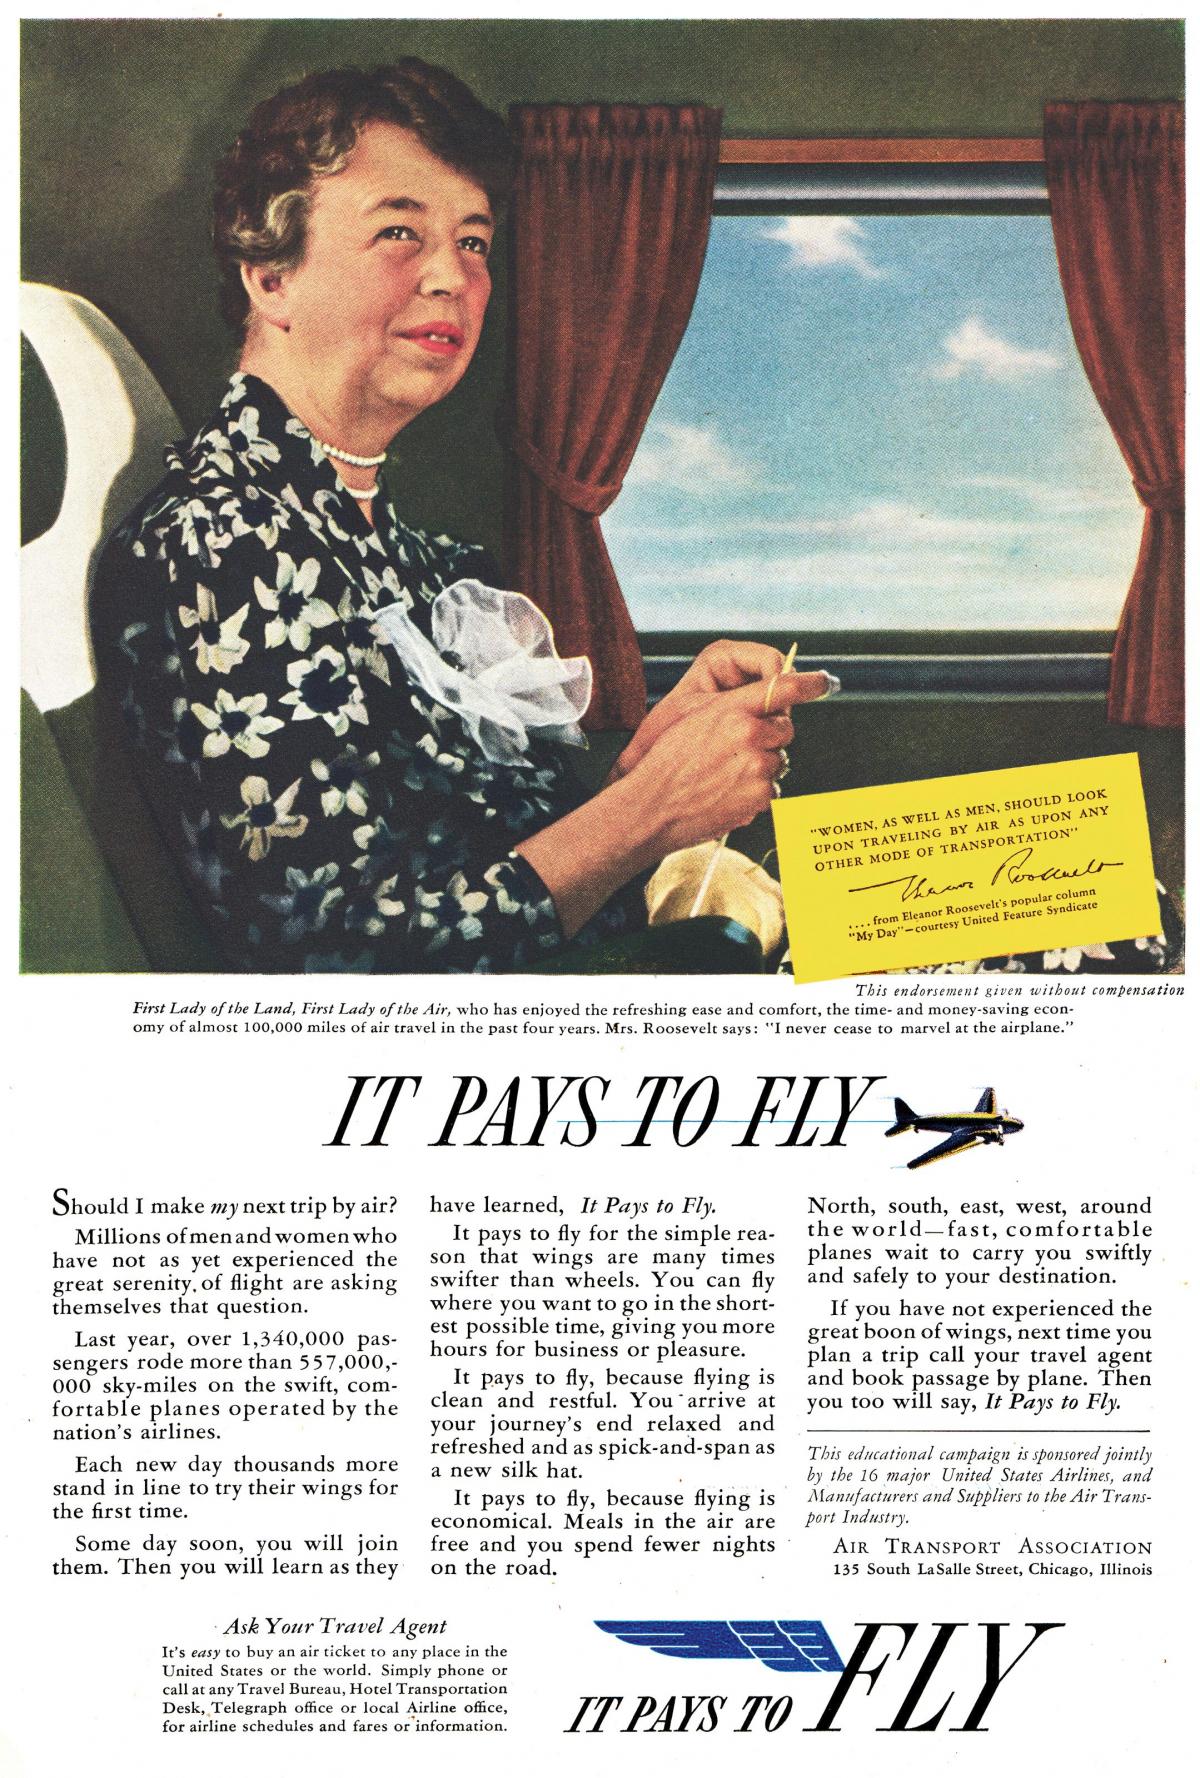 magazine advertisement for airplane travel with Mrs. Roosevelt.